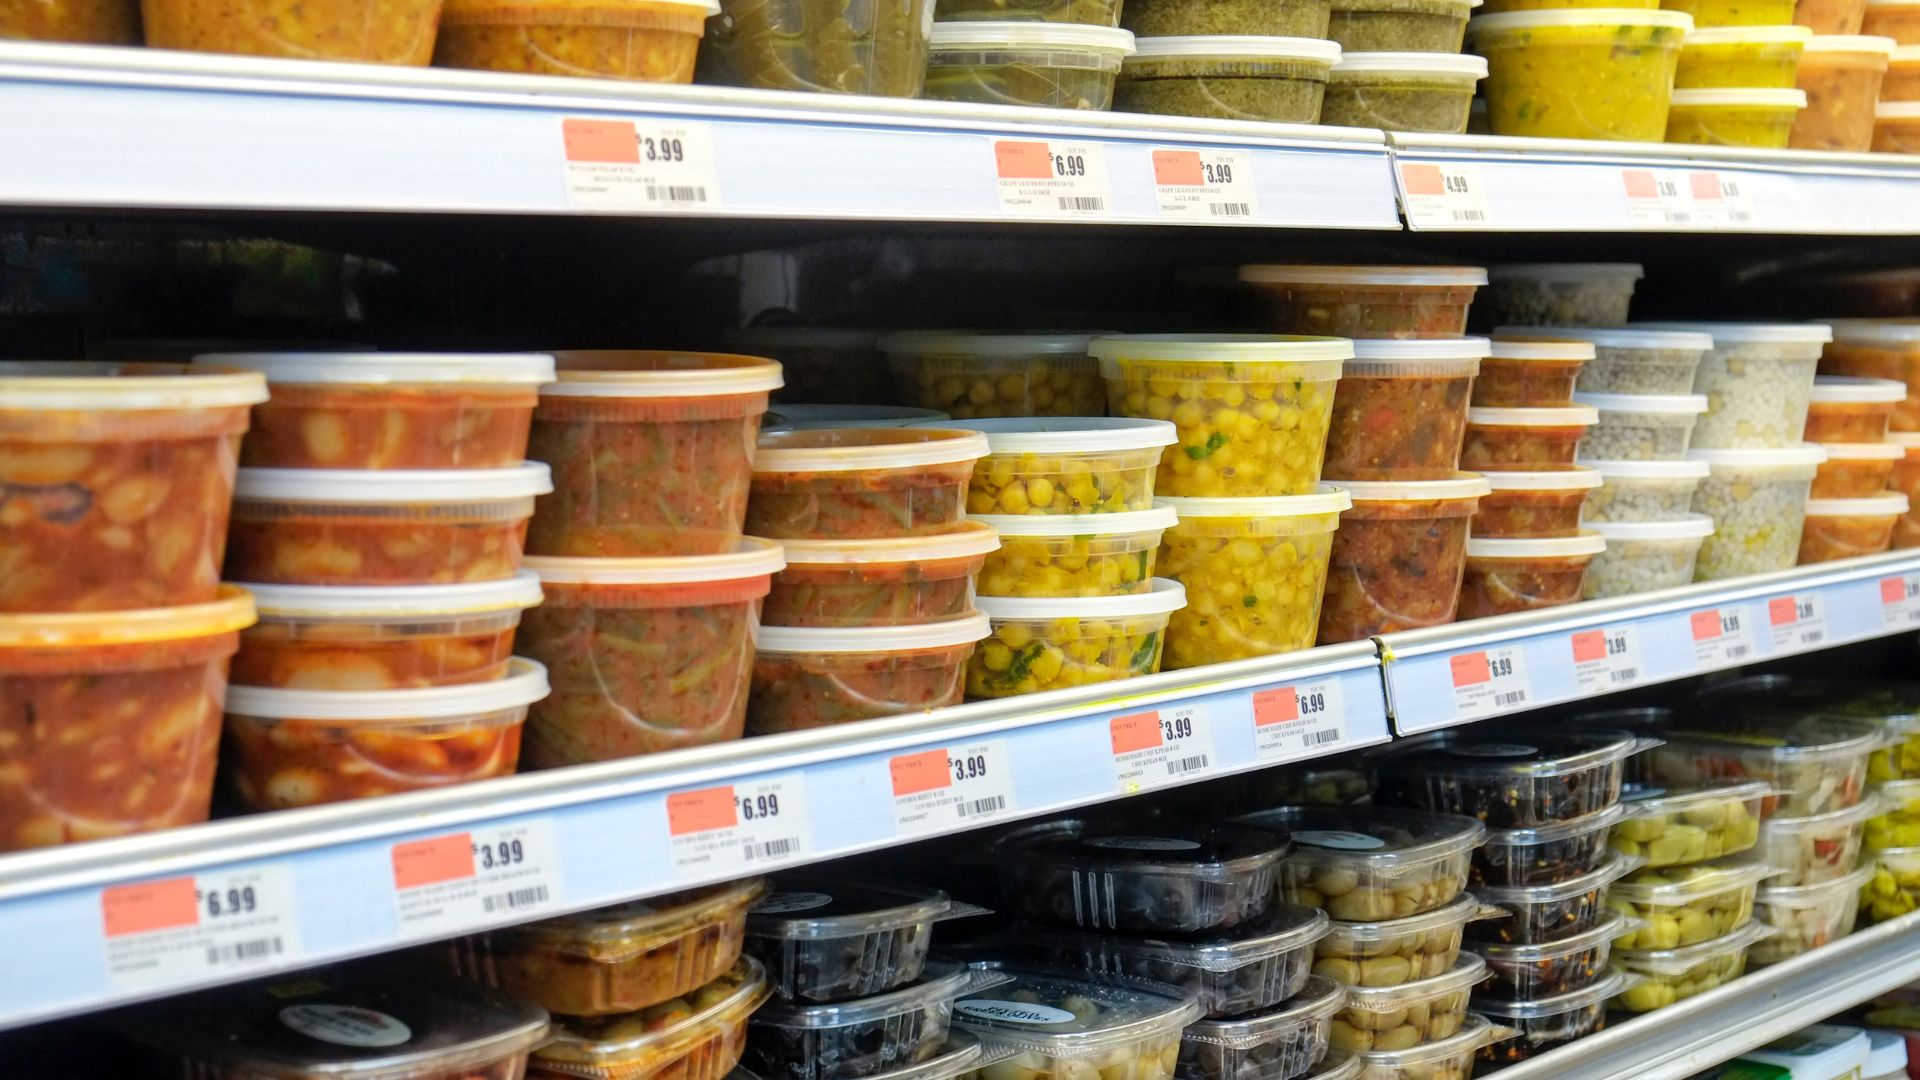 preprepared foods, such as soups, and small packages of olives lined up on shelves in a grocery store